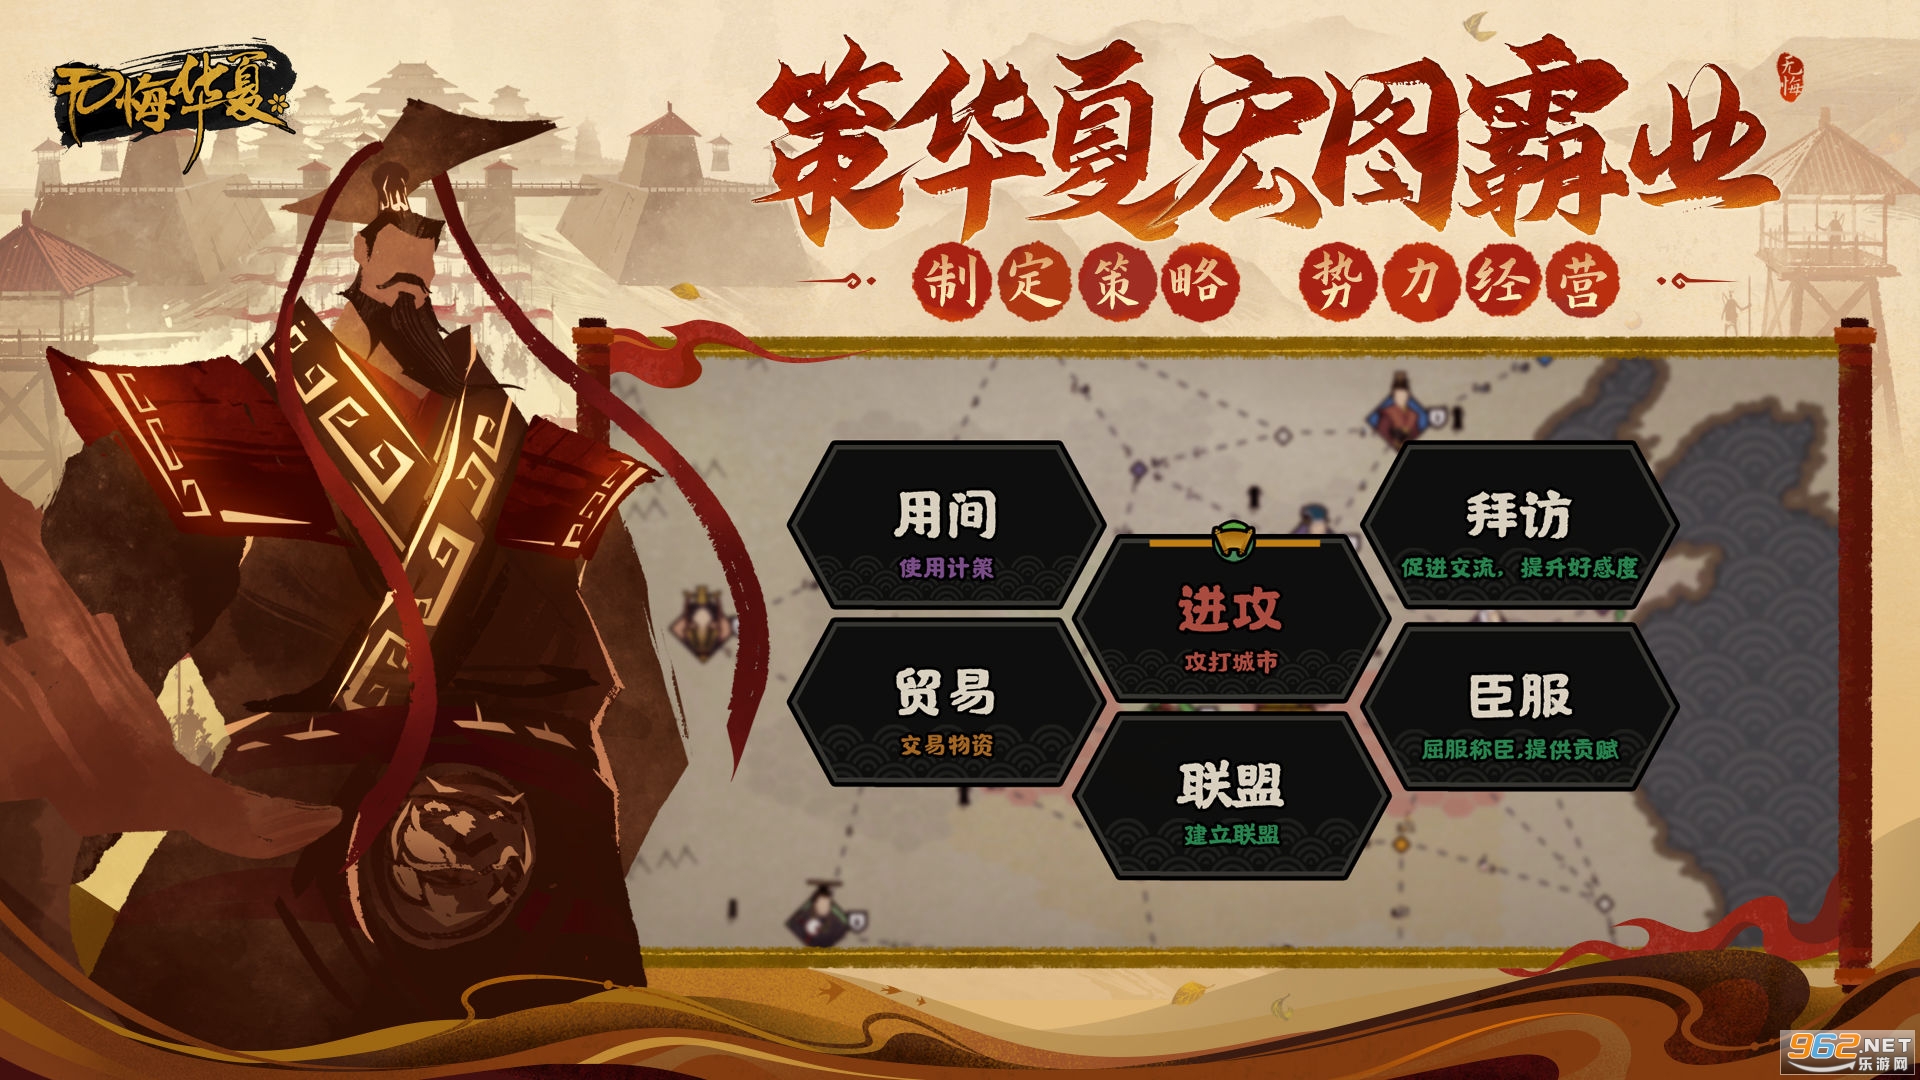  No regrets screenshot 3 of official v3.4.91 Android version of Huaxia mobile game